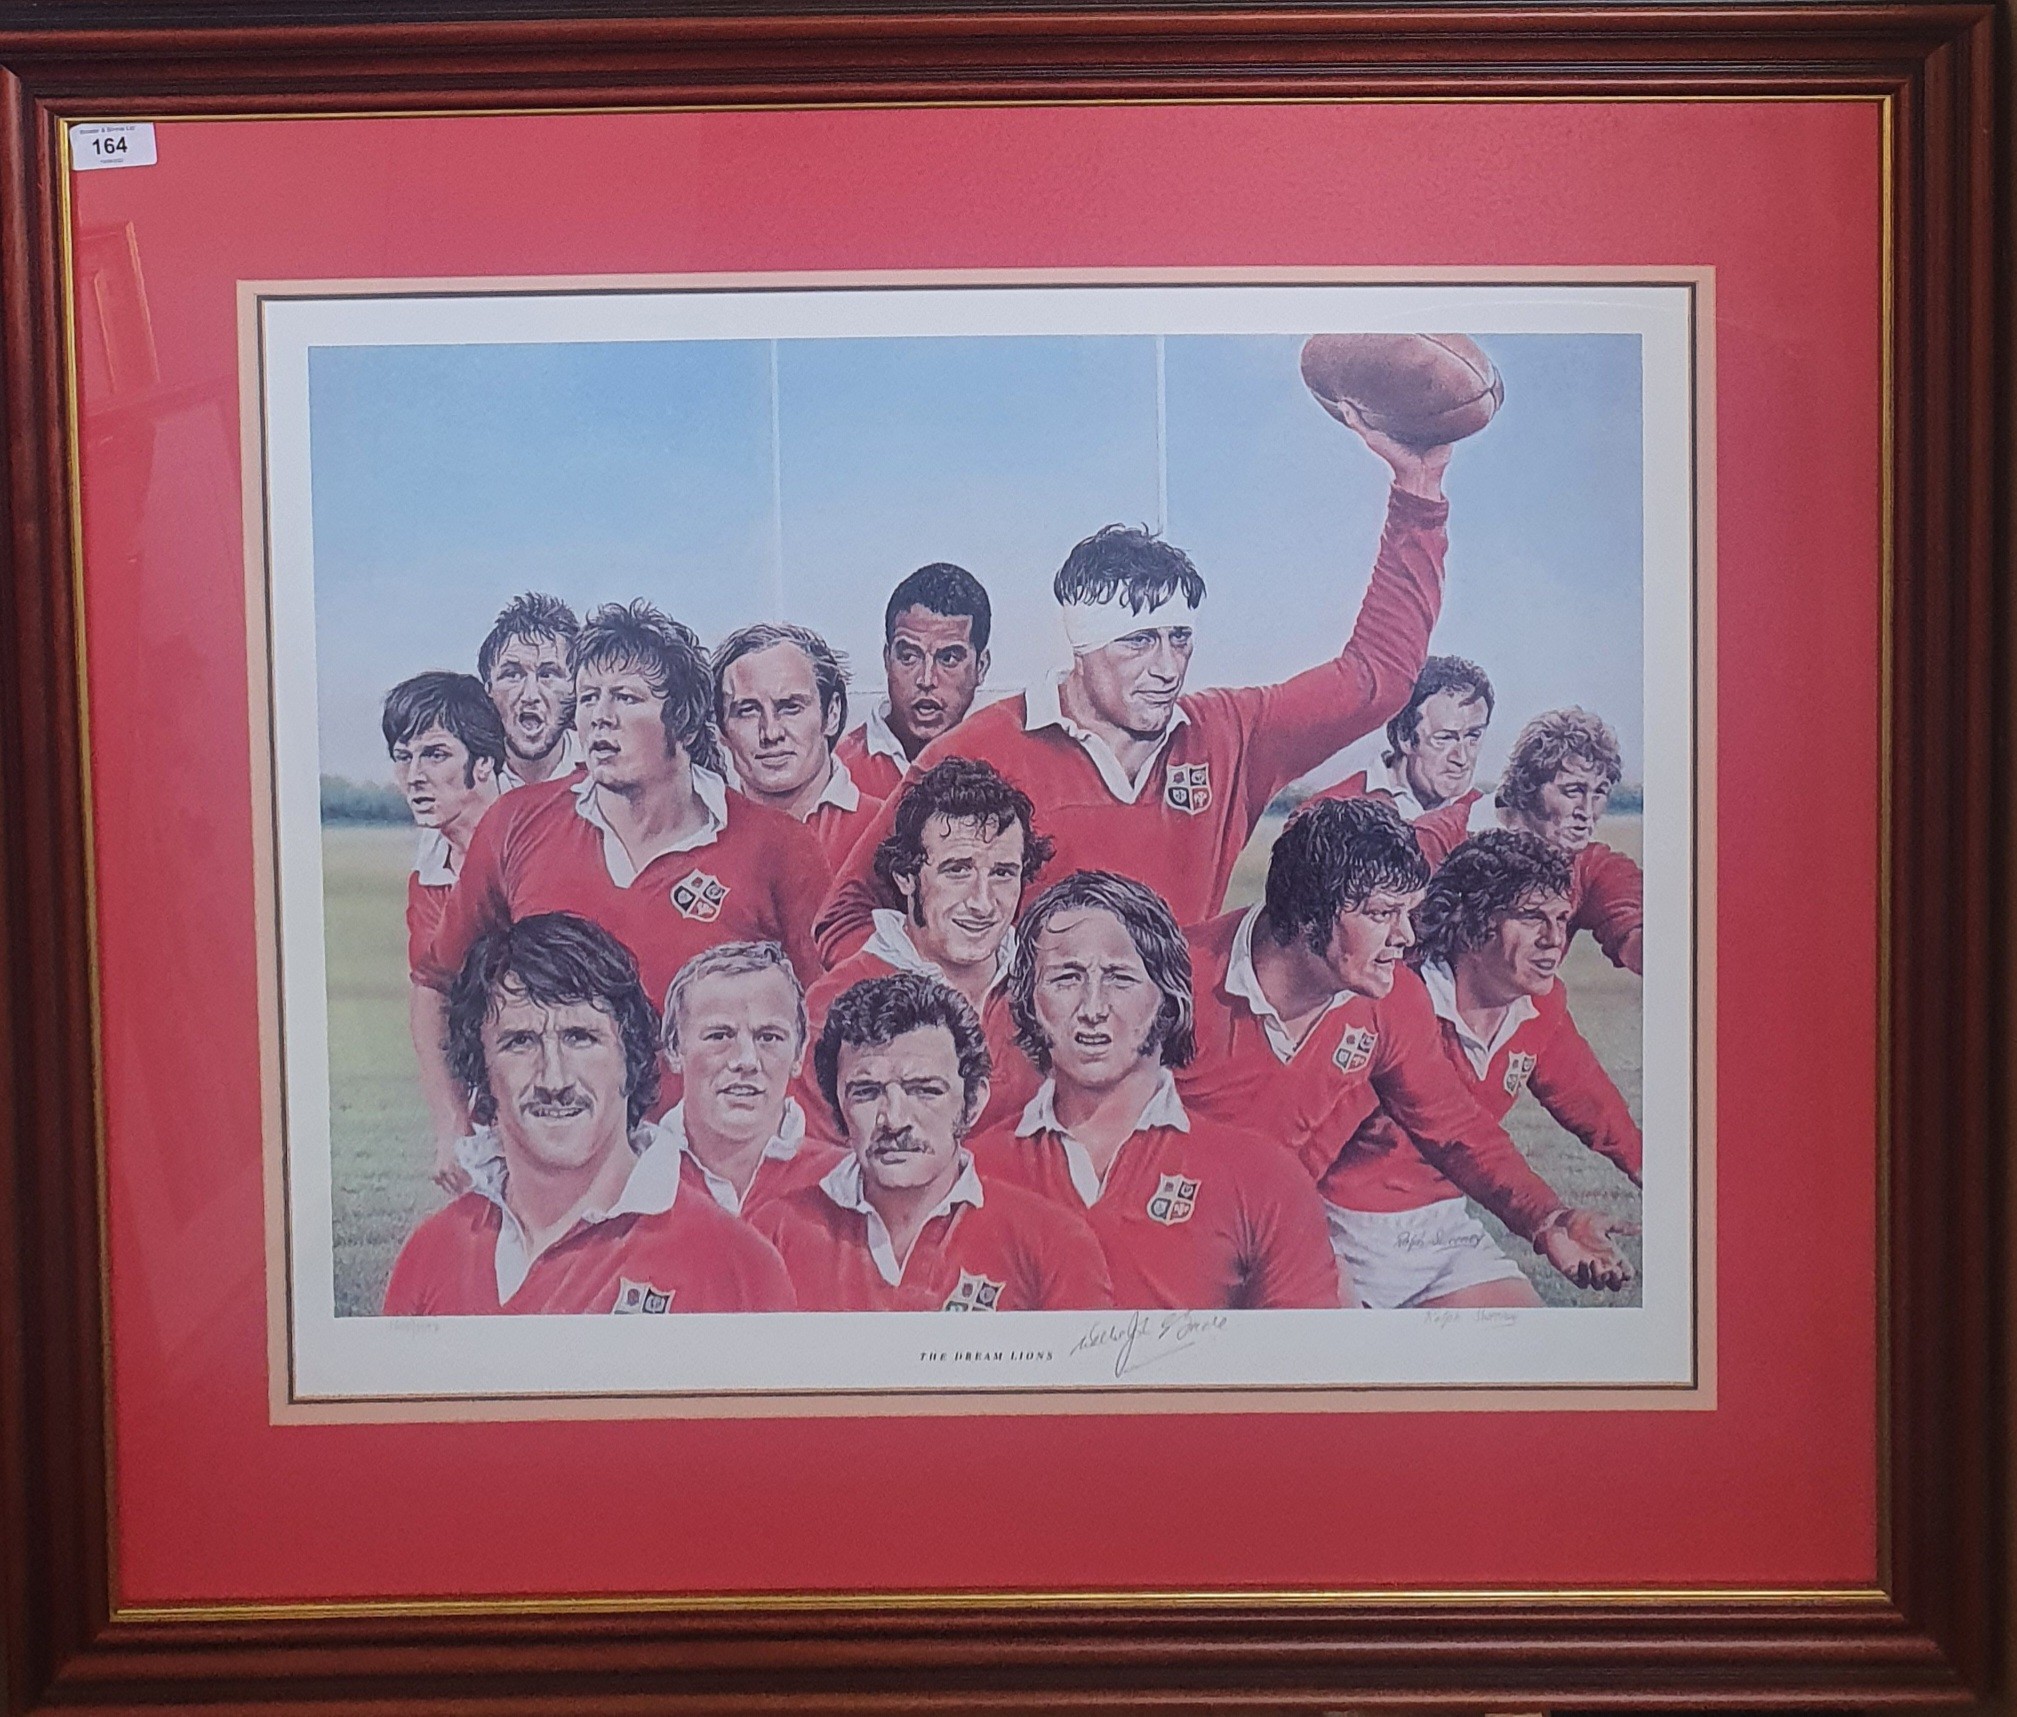 A limited edition print titled "The Dream Lions", by the artist Ralph Sweeney, numbered 58/1997,